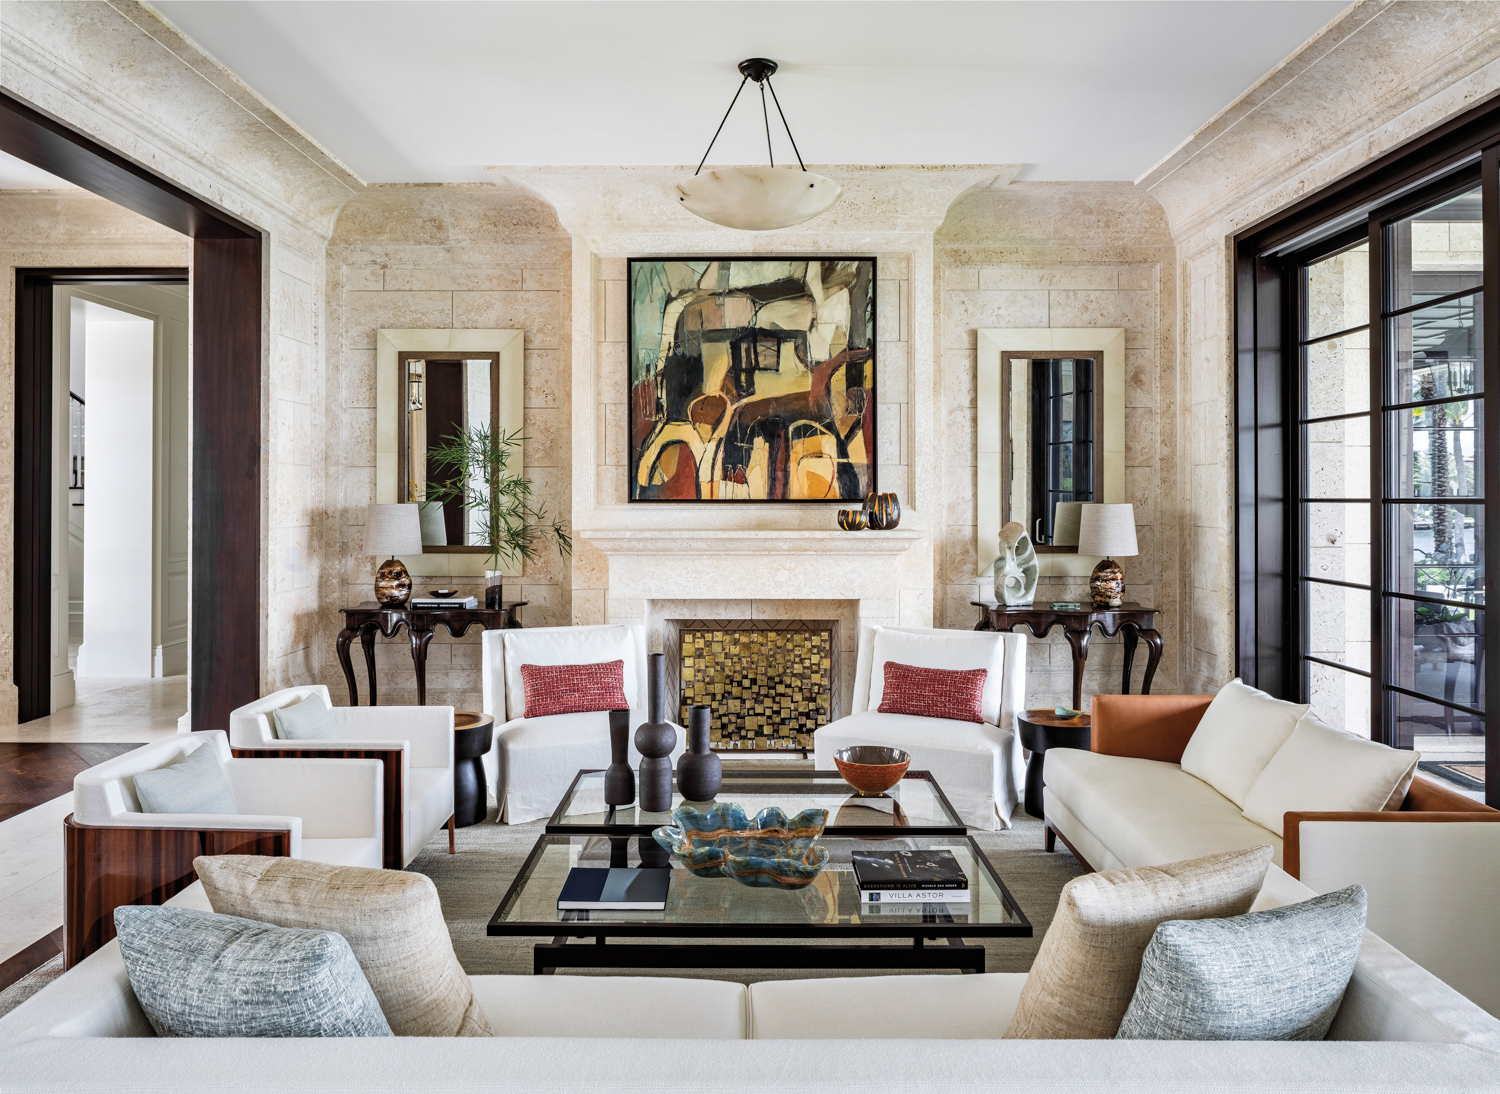 great room with coral stone walls, neutral-toned furnishings and artwork above fireplace